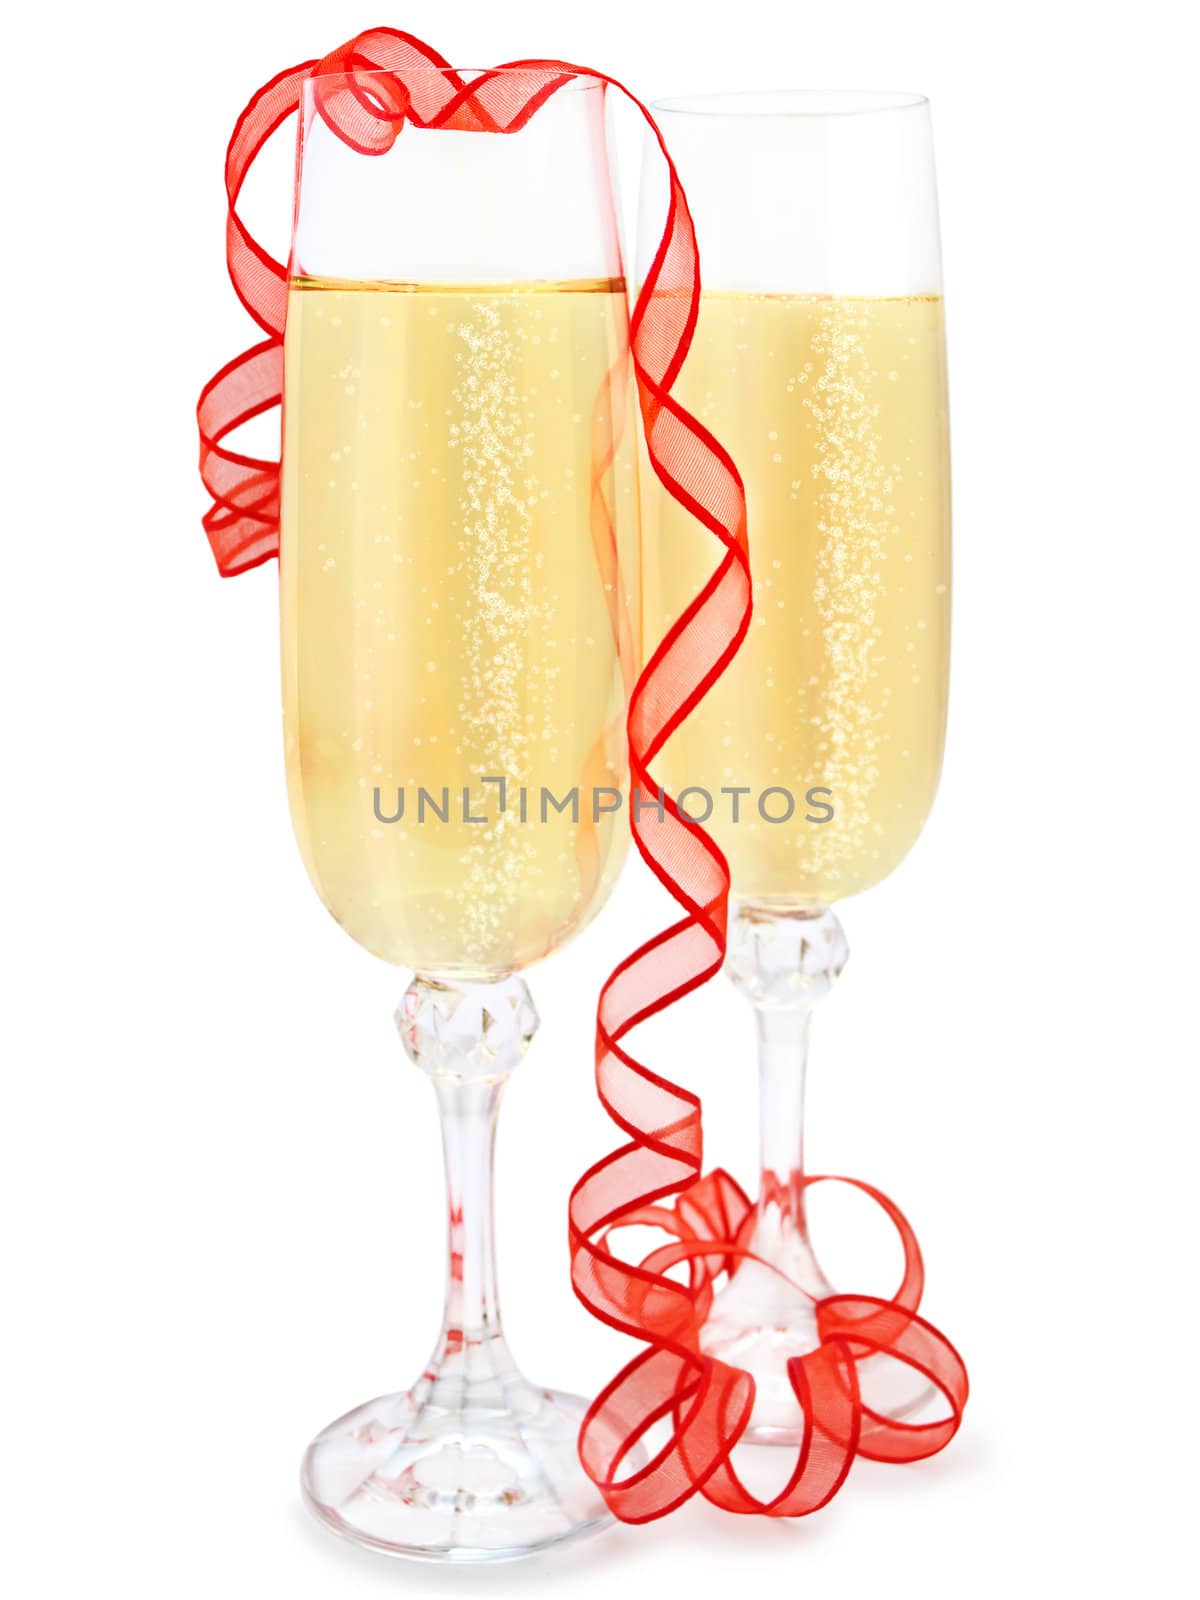 Two elegant champagne glasses with red ribbon against white background 